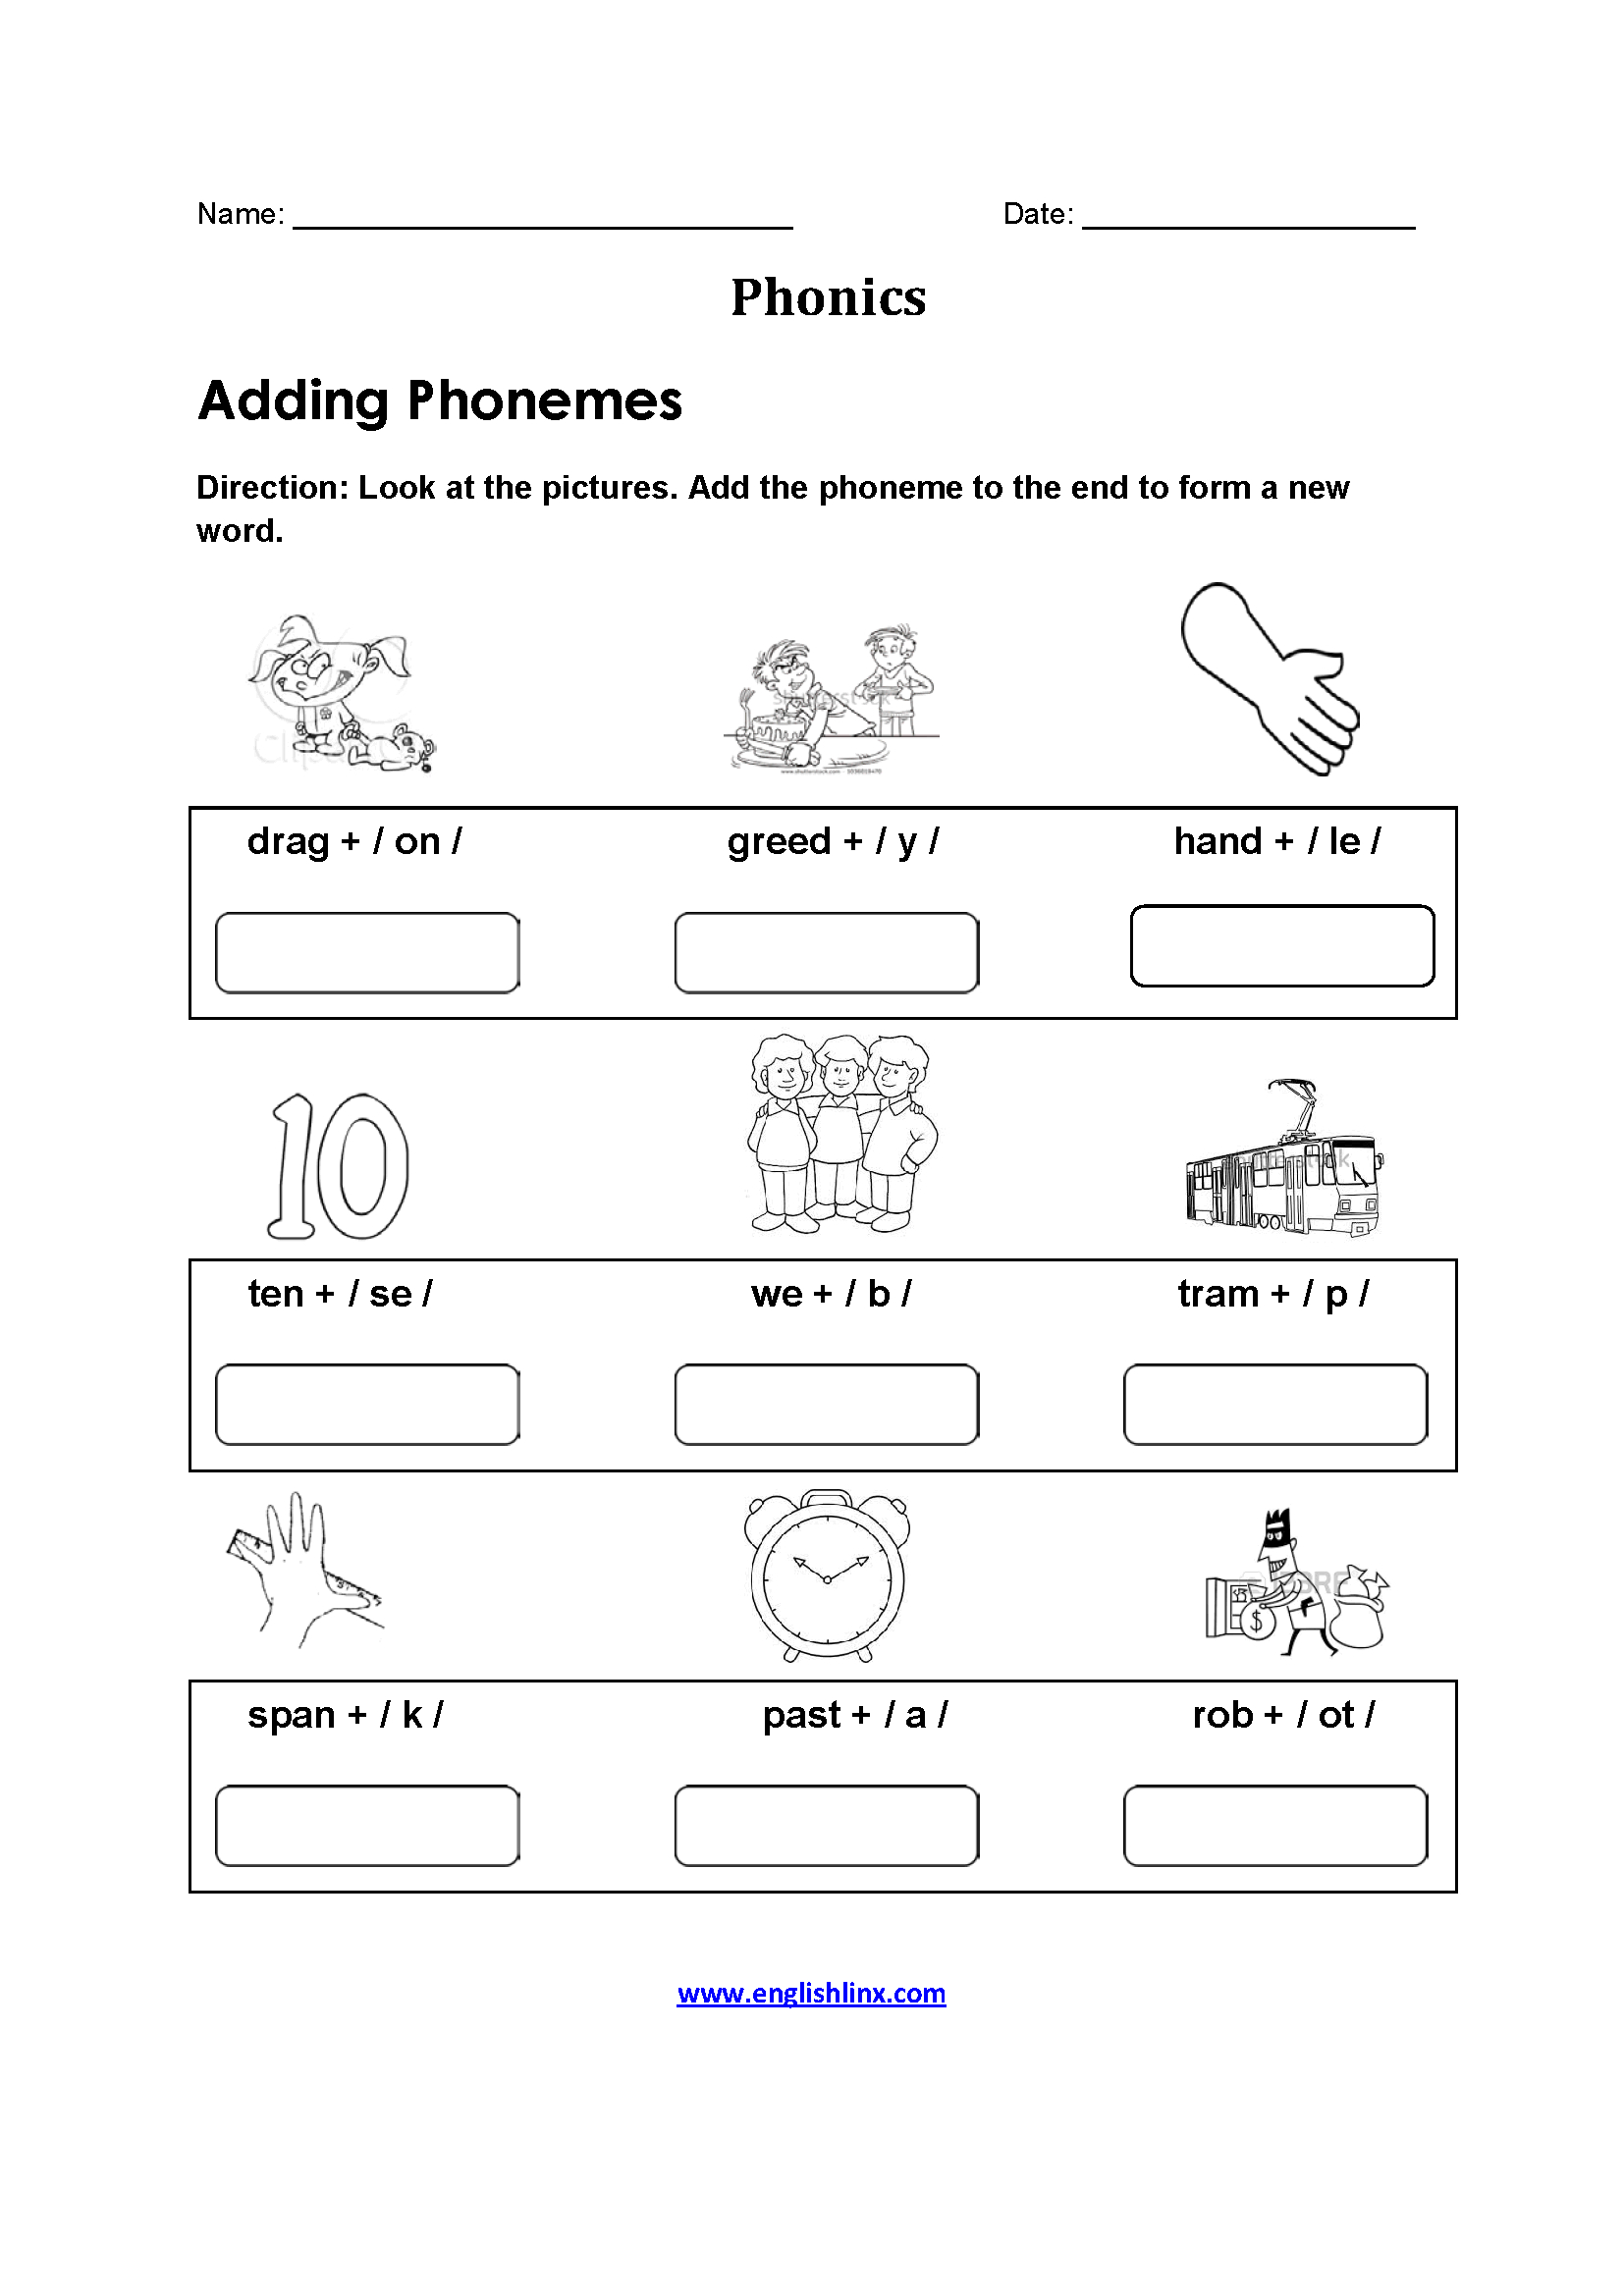 second-grade-phonics-worksheets-and-flashcards-free-printable-phonics